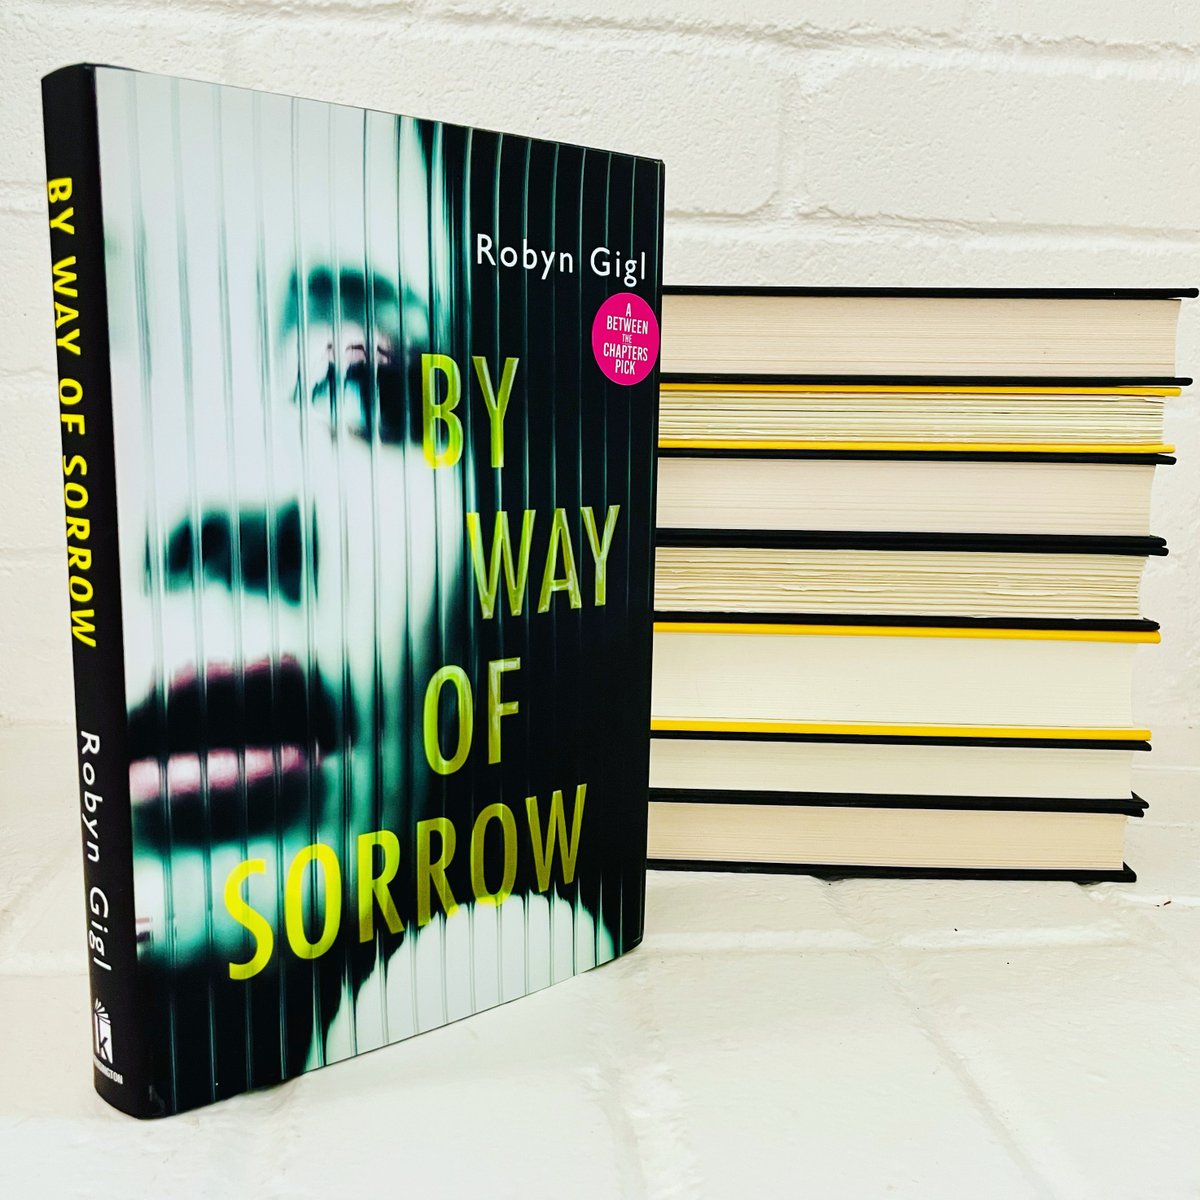 In BY WAY OF SORROW author Robin Gigl combines a riveting plot with captivating characters. Review: e135-abookaweek.blogspot.com/2021/03/by-way… @KensingtonBooks #bookreview #ByWayofSorrow